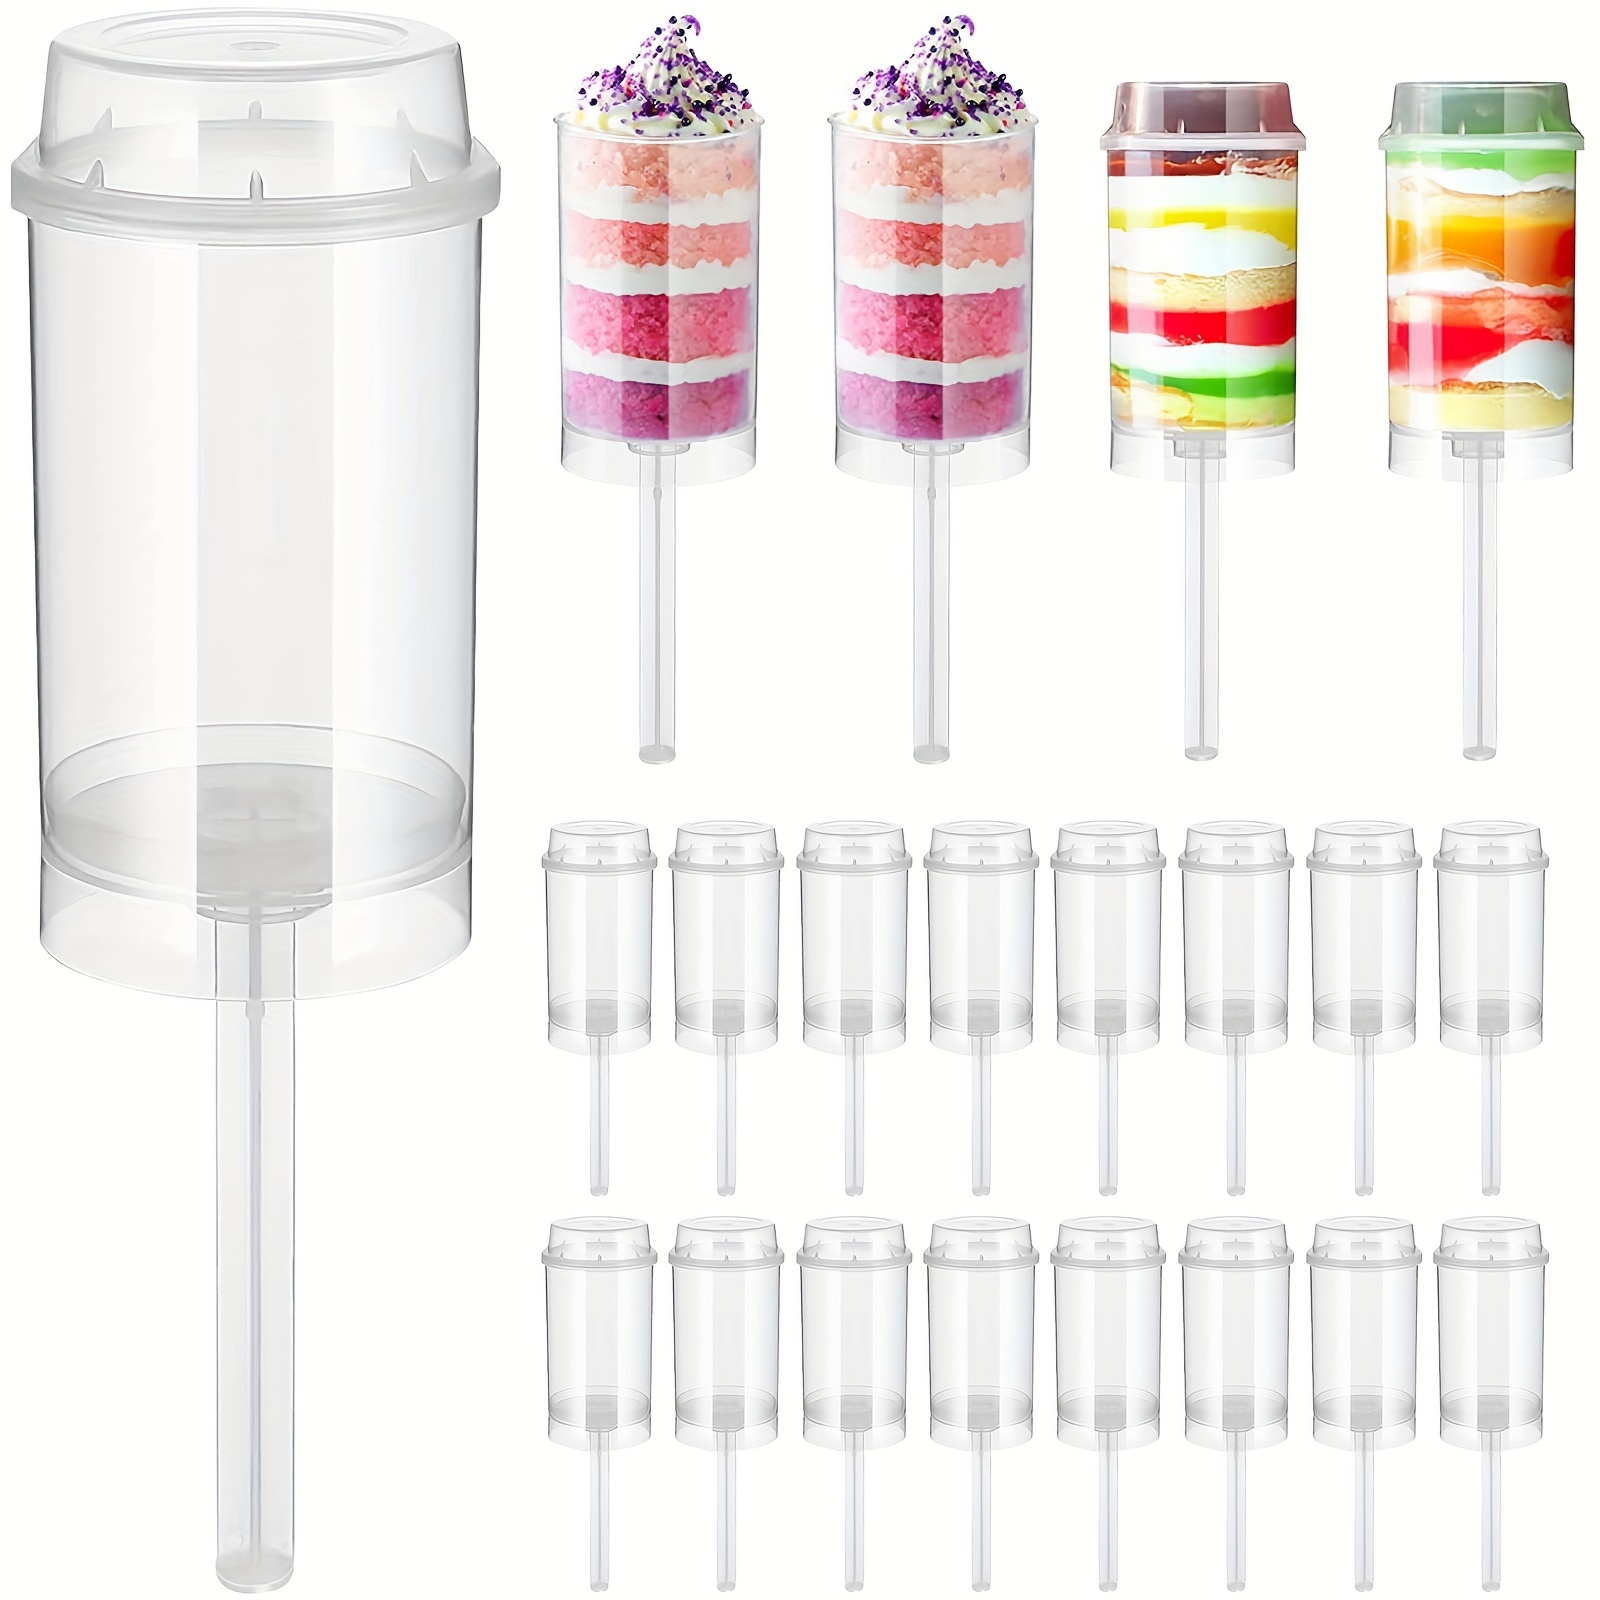 

30pcs, Cake Pop Shooter, Round Plastic Jelly Ice Cream Push-up Containers With Lids Base And Stick For Wedding Birthday Christmas Dessrt Party Baby Shower